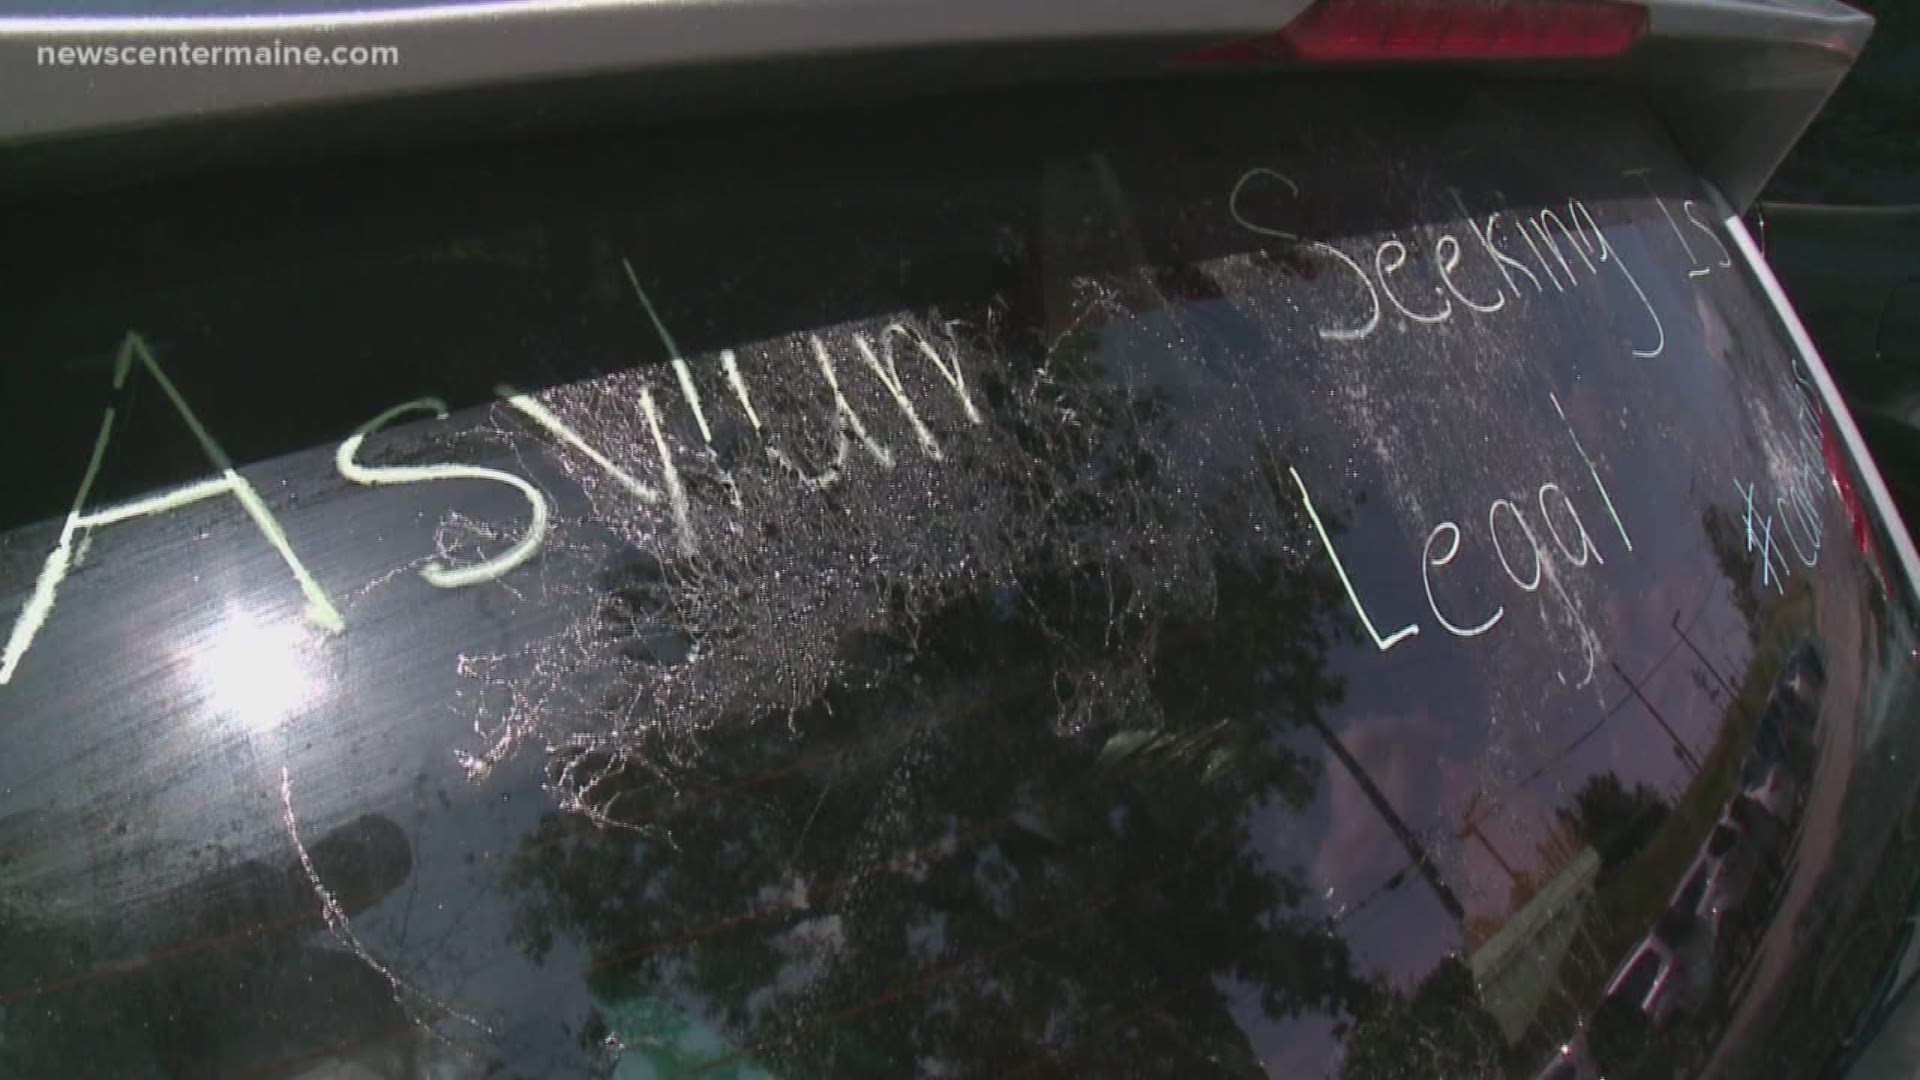 Teacher's car vandalized at the Expo.